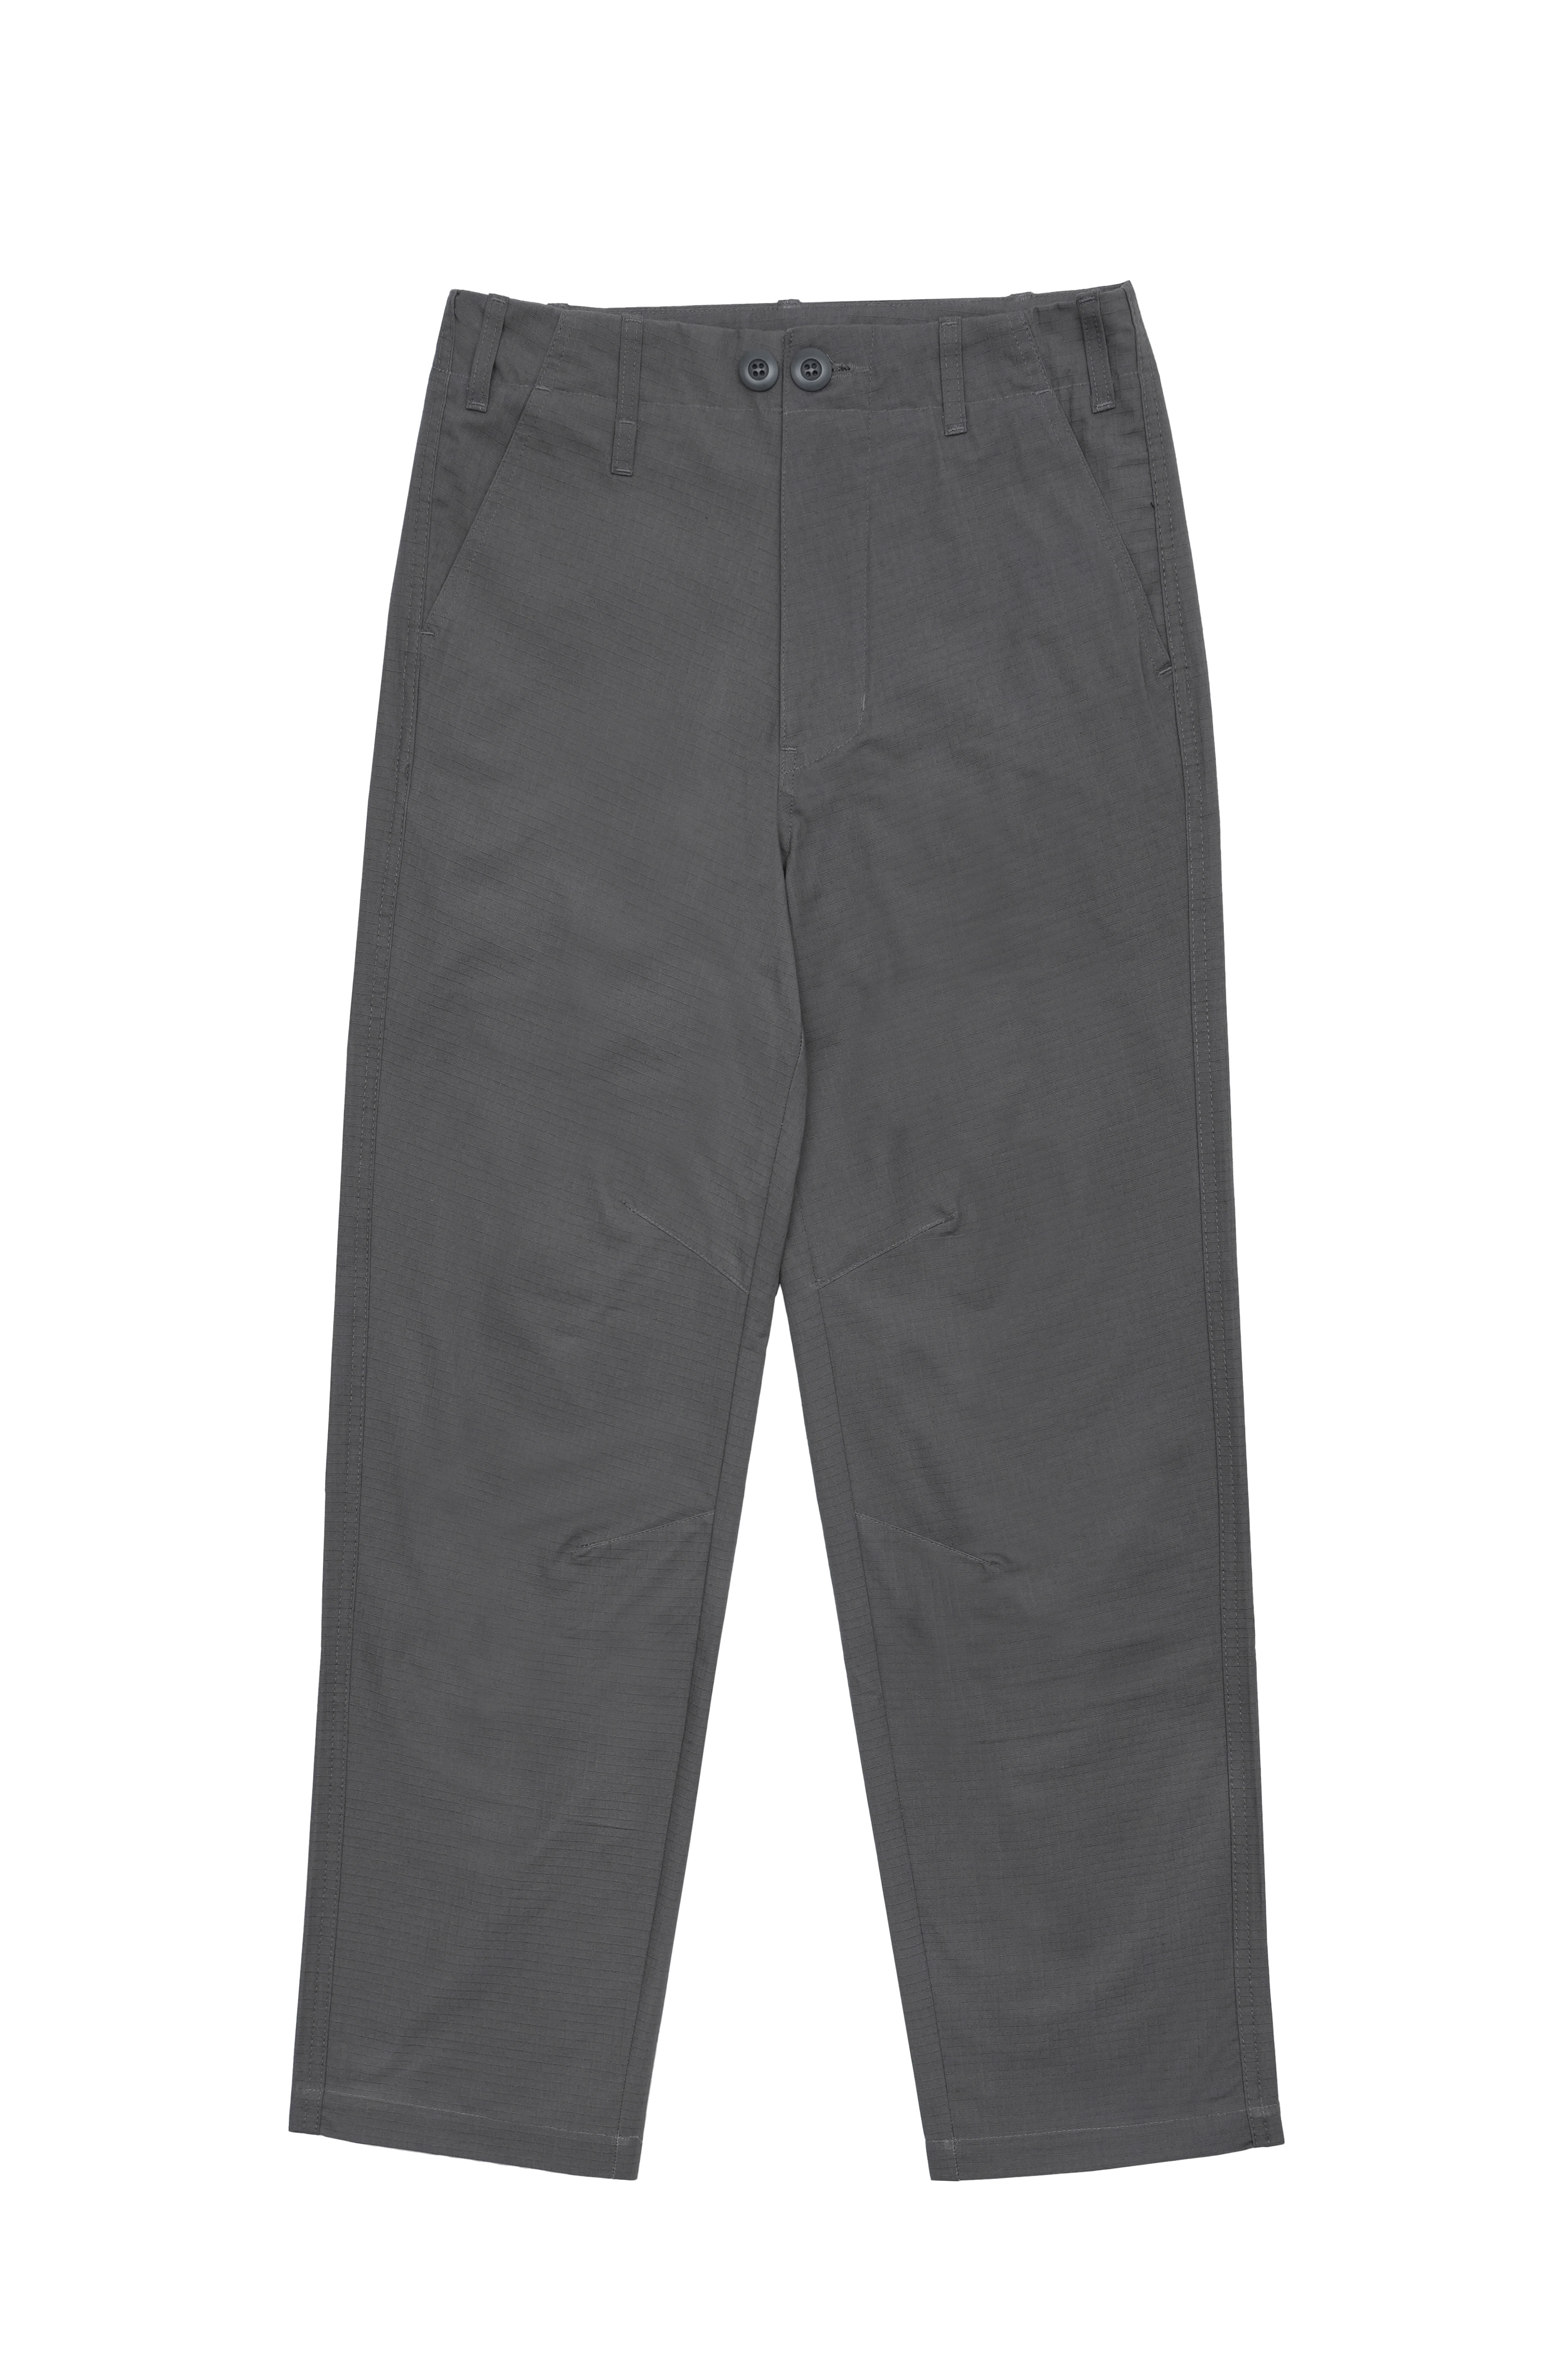 TWO BUTTON RIPSTOP PANTS / charcoal